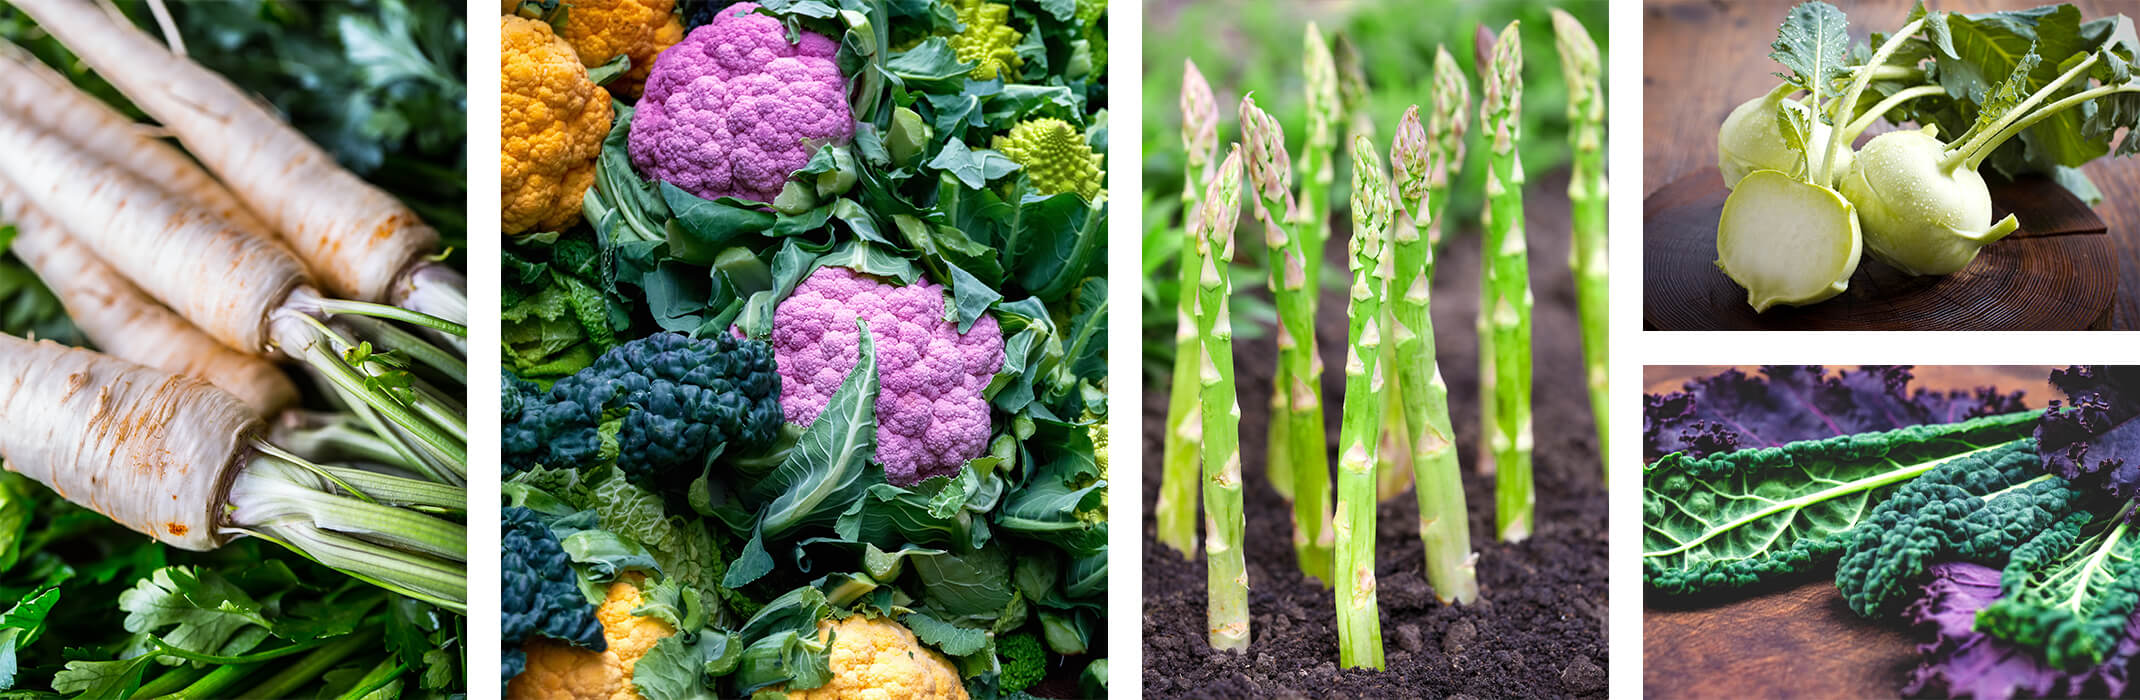 5 images: parsnips, multicolor cauliflower varieties, asparagus growing in the ground, kohlrabi and green and purple kale